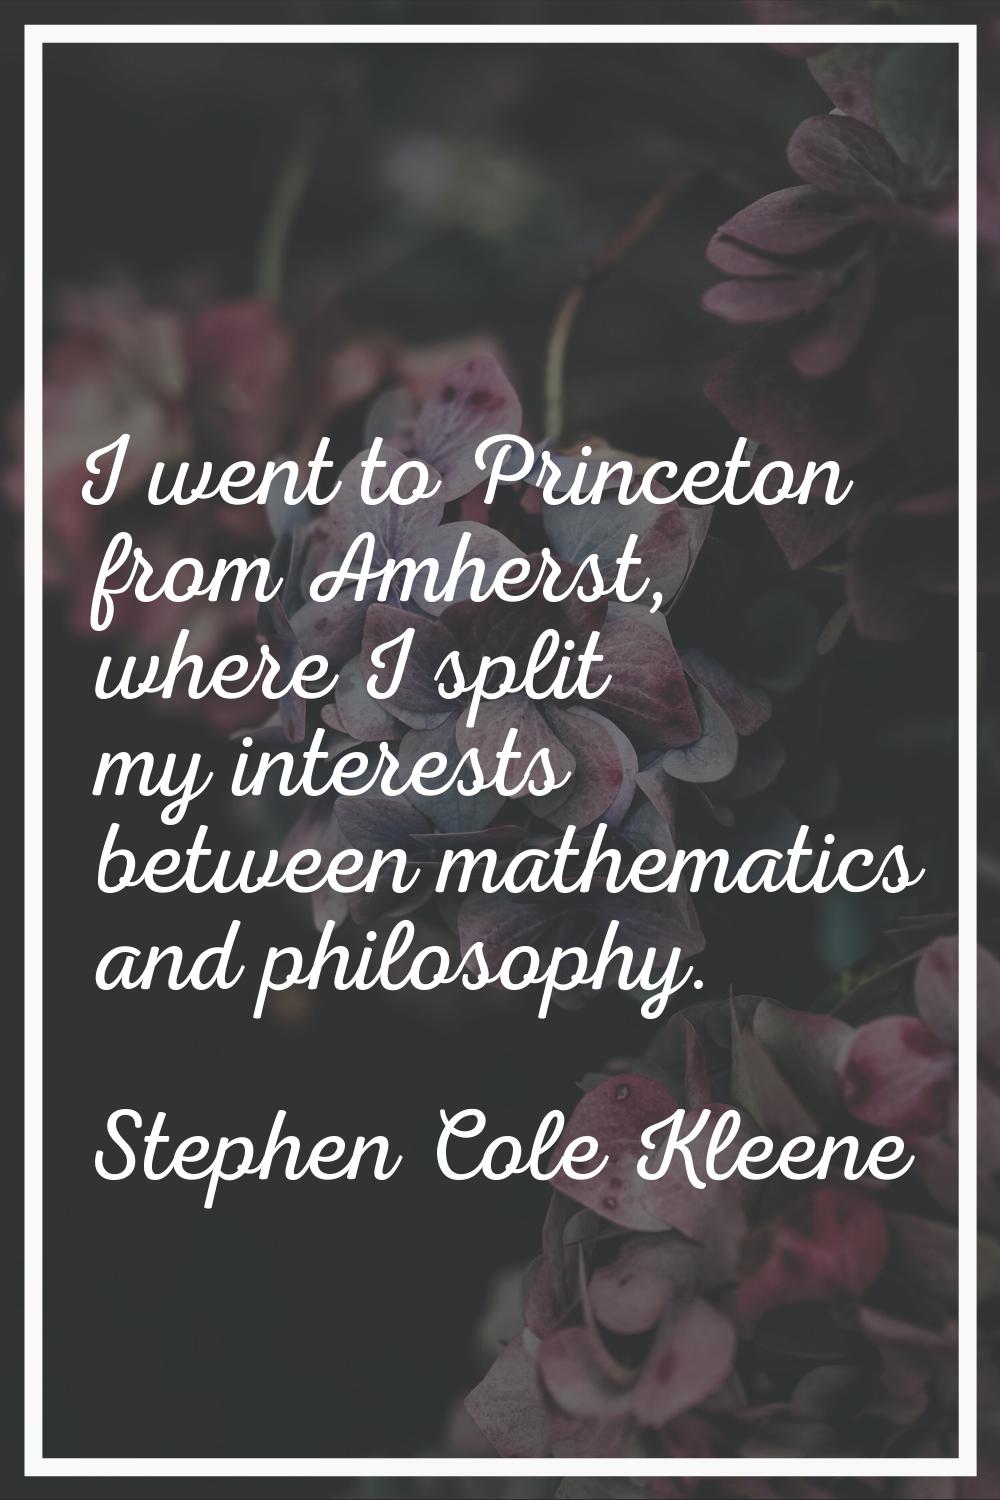 I went to Princeton from Amherst, where I split my interests between mathematics and philosophy.